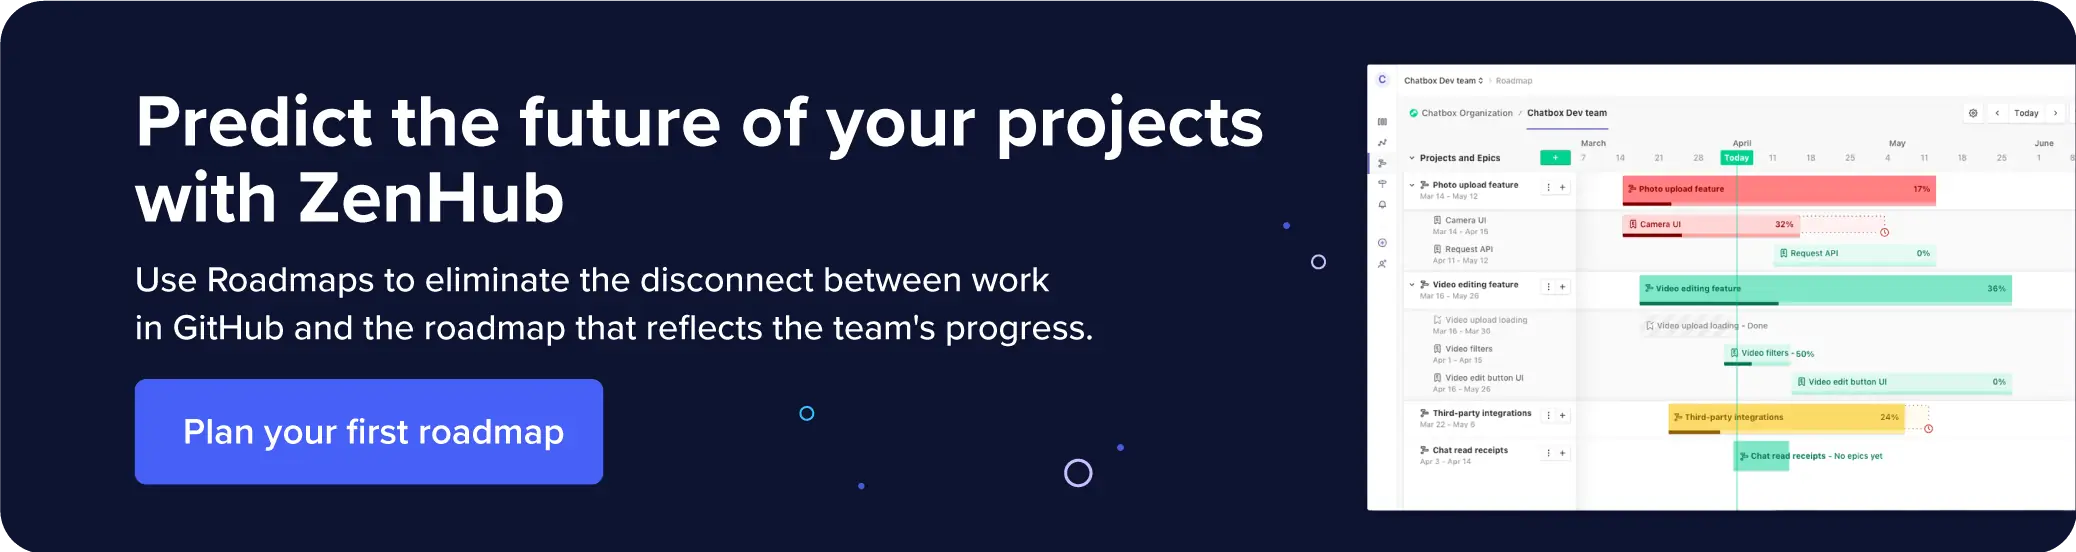 Describes how to use ZenHub's Roadmaps to eliminate the disconnect between work in GitHub and your roadmap.